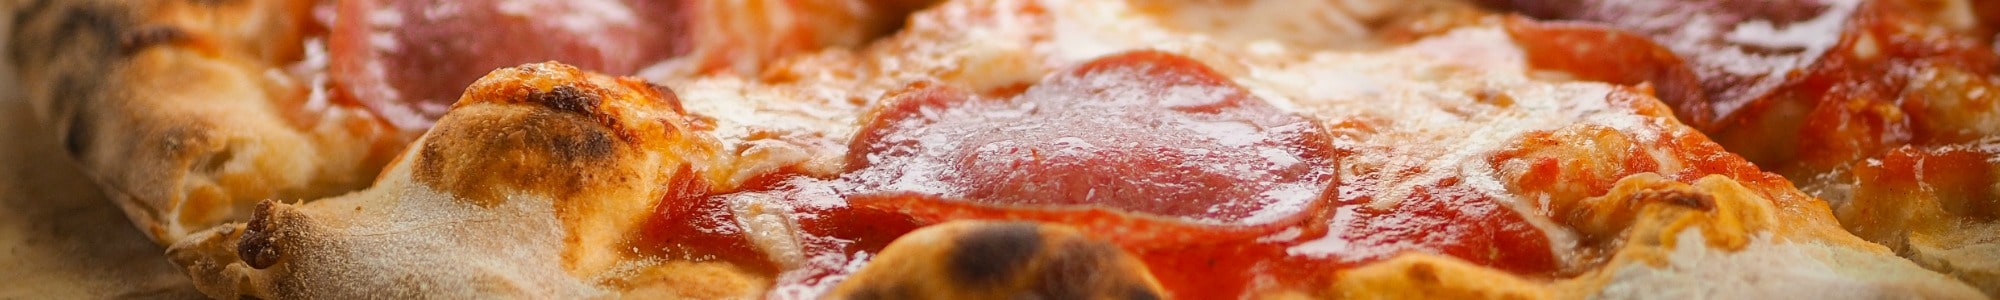 Pizza banner image